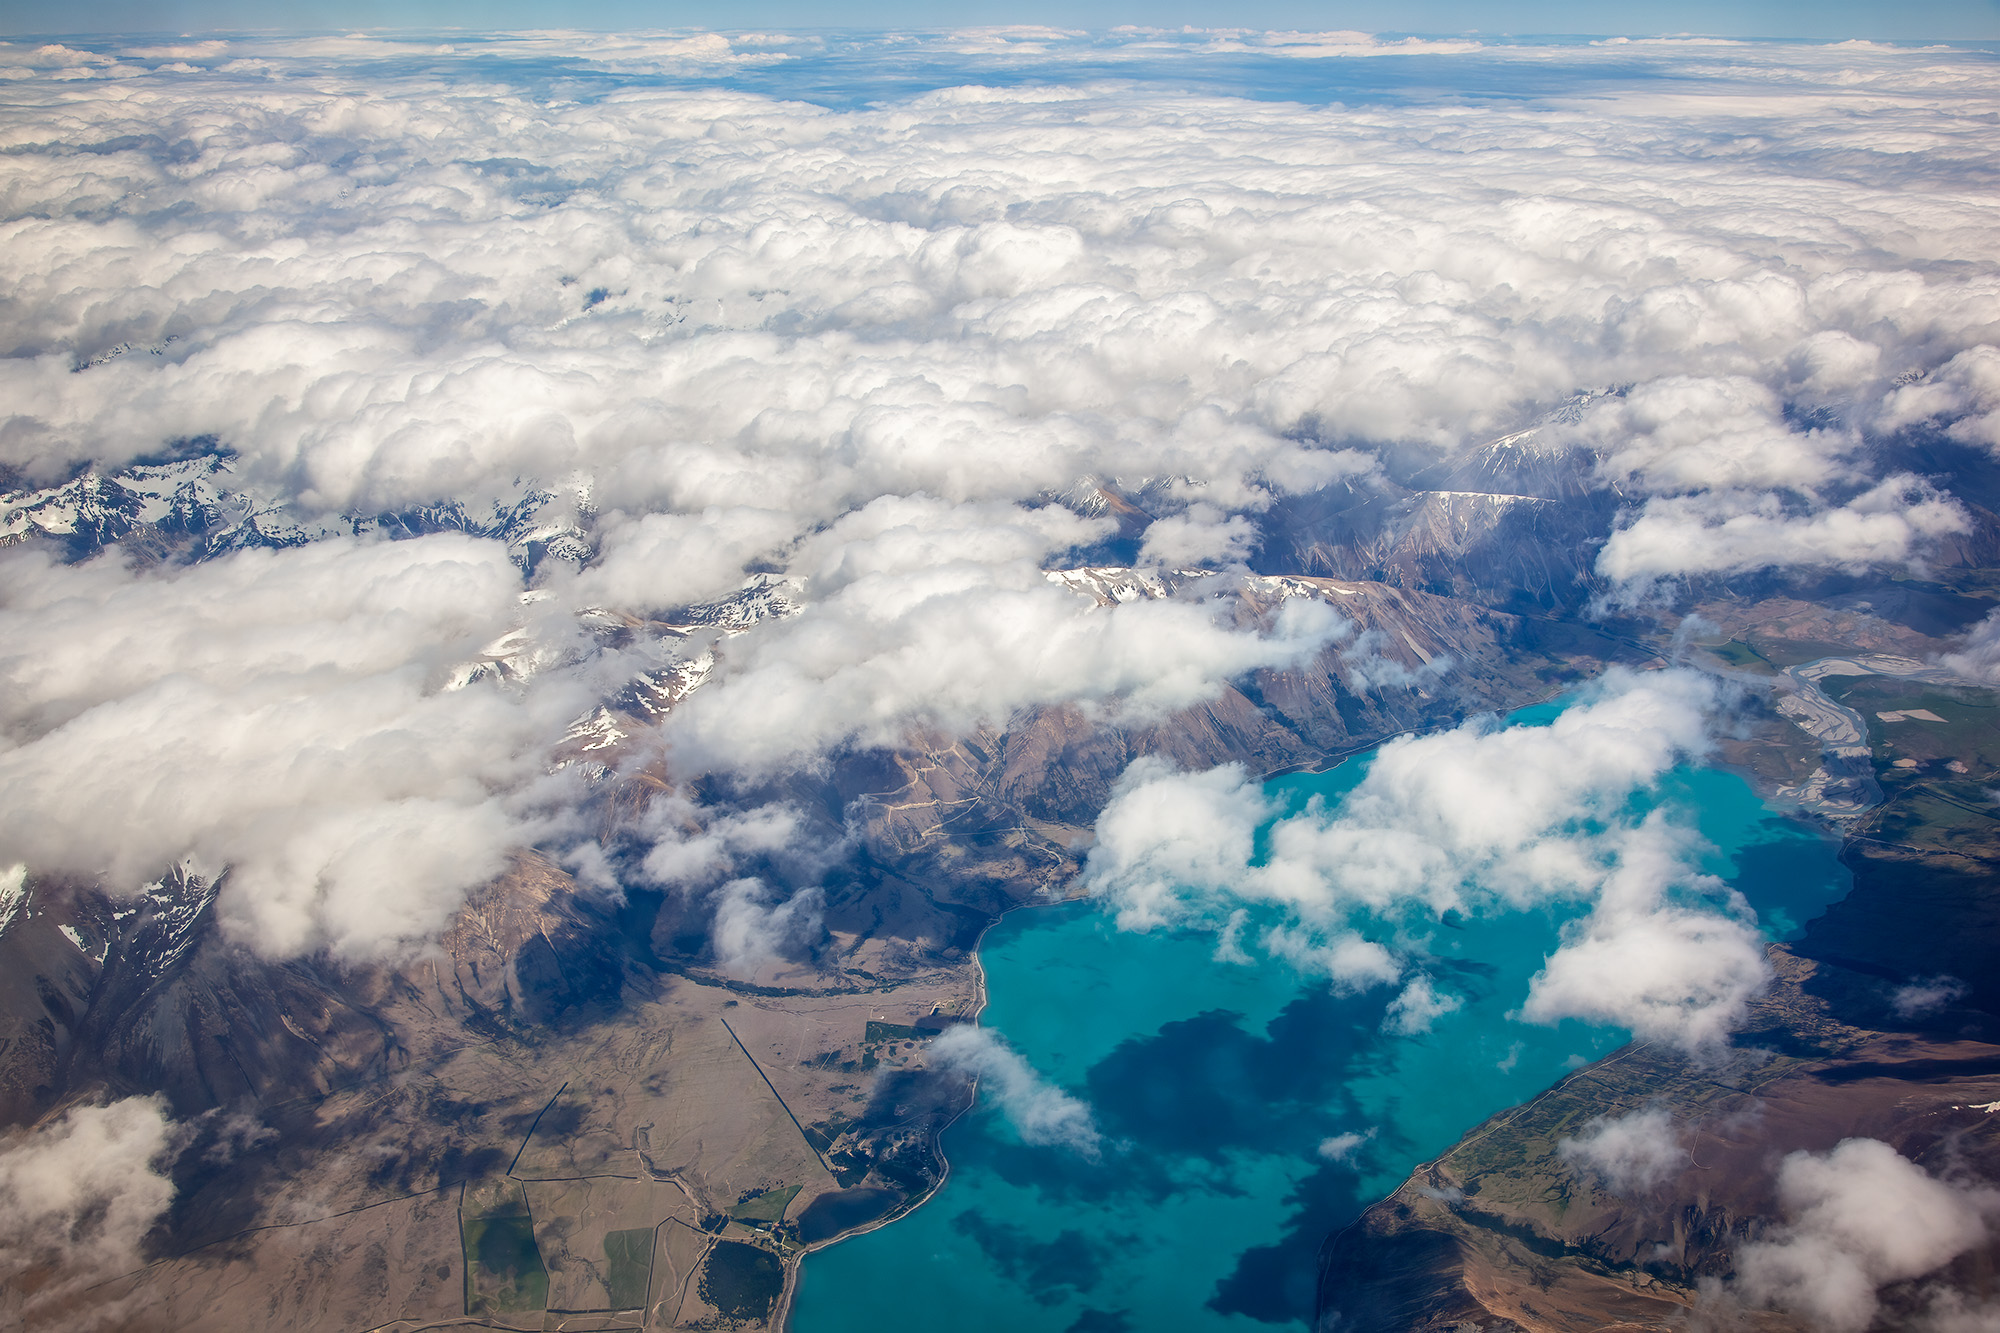 Captured from the window of a plane flying high above New Zealand's Southern Alps, this image presents a breathtaking symphony...